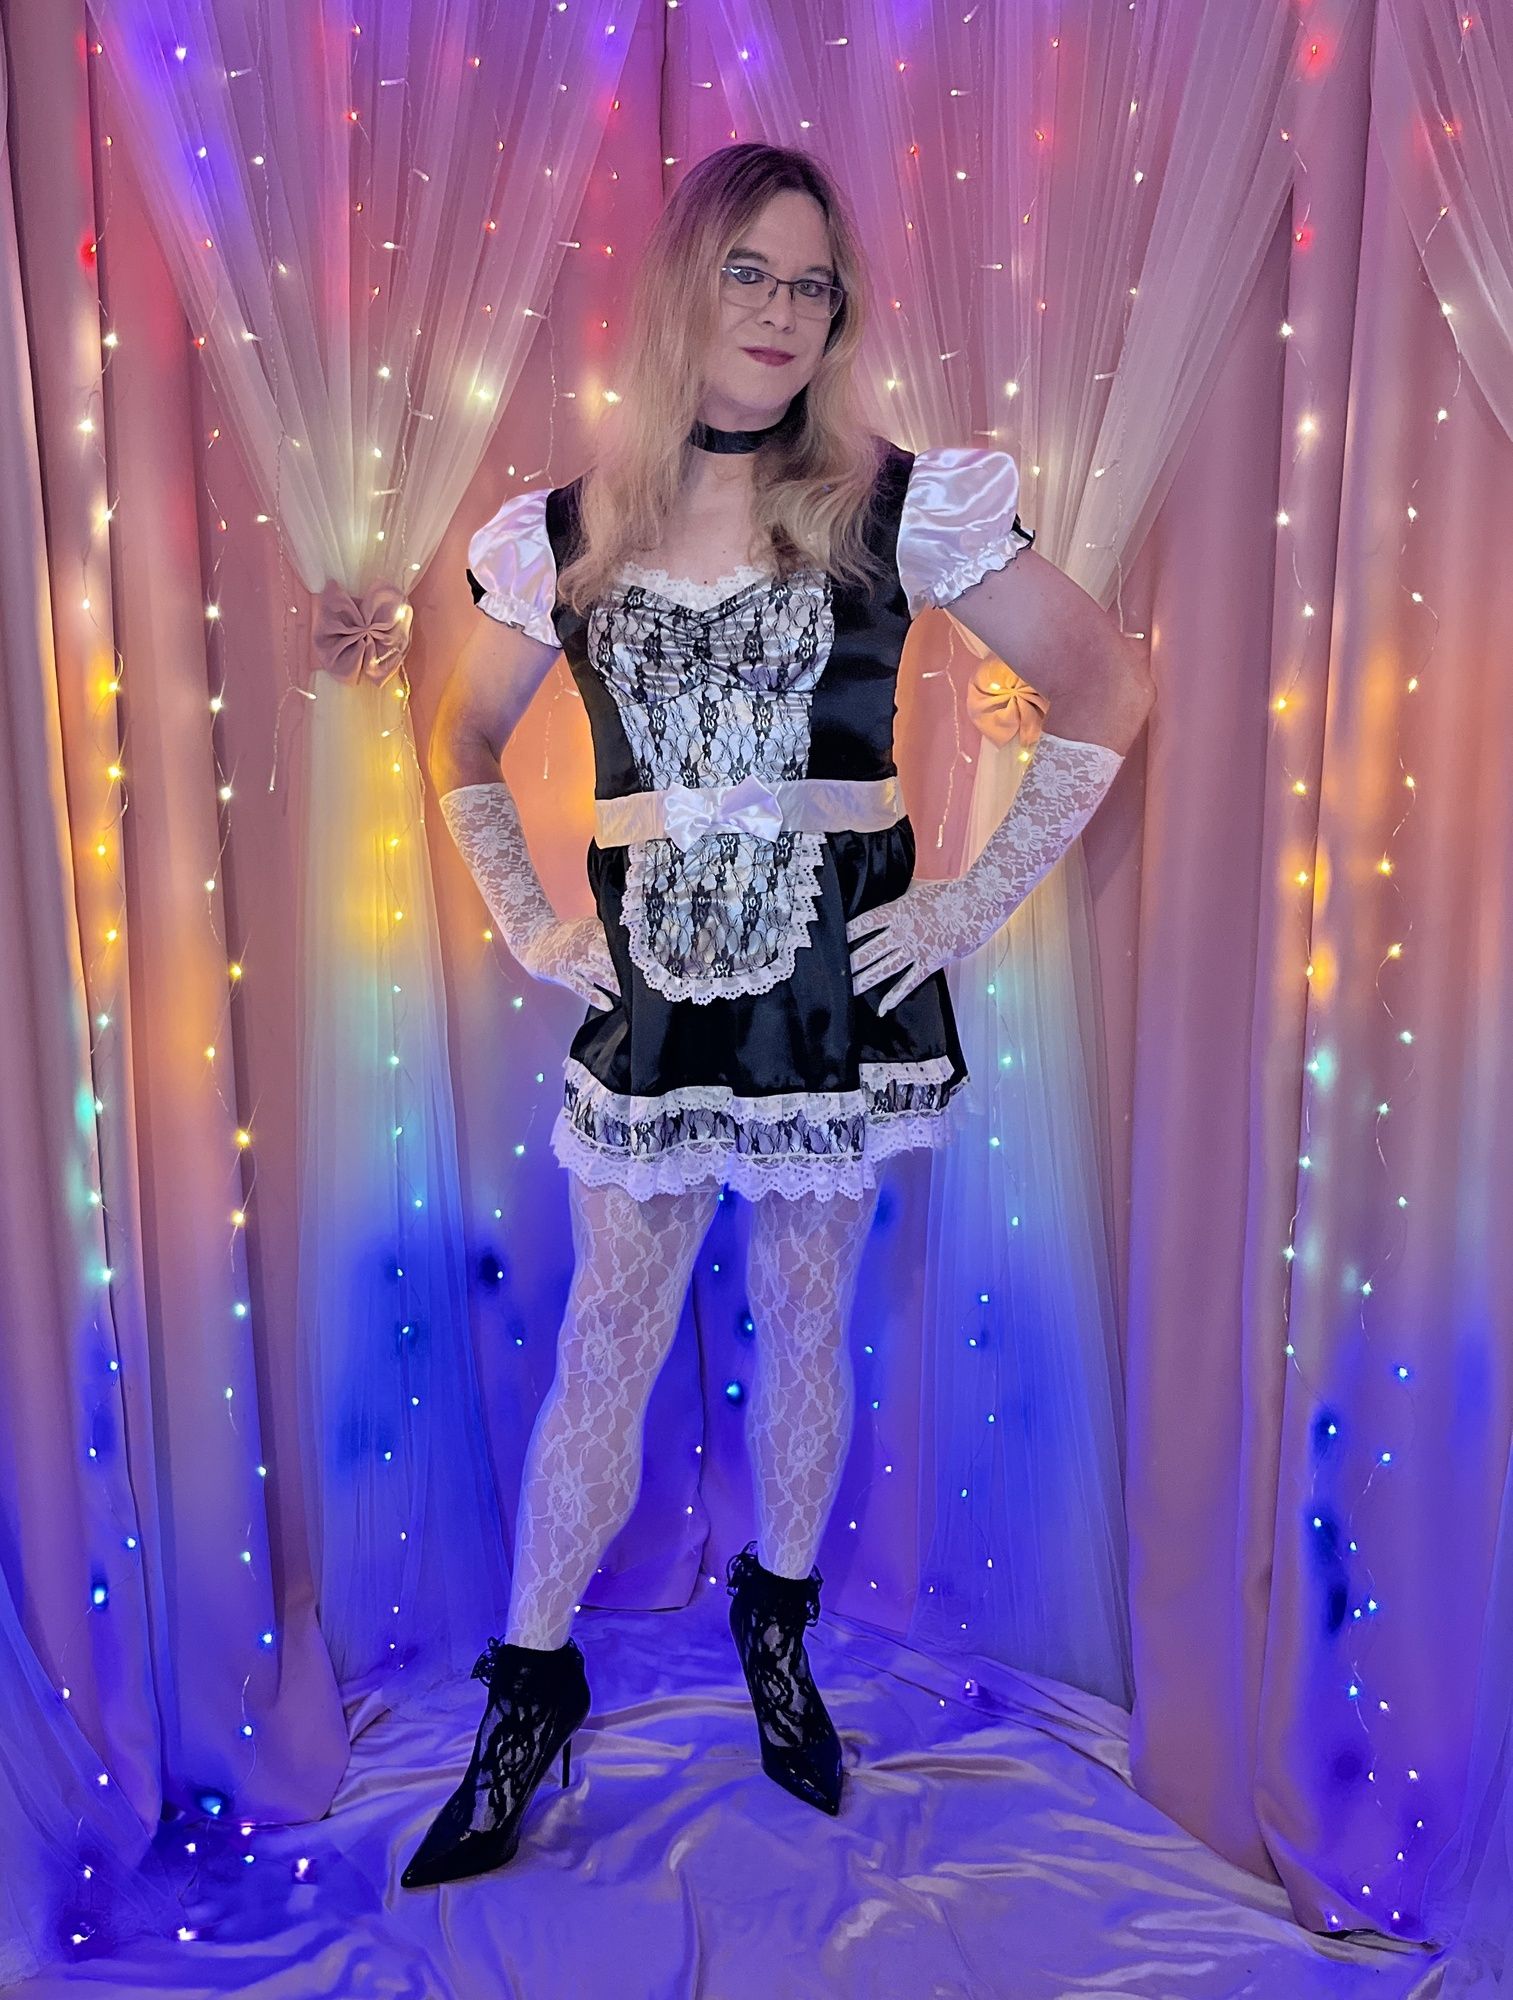 Joanie - Maid In Lace #4